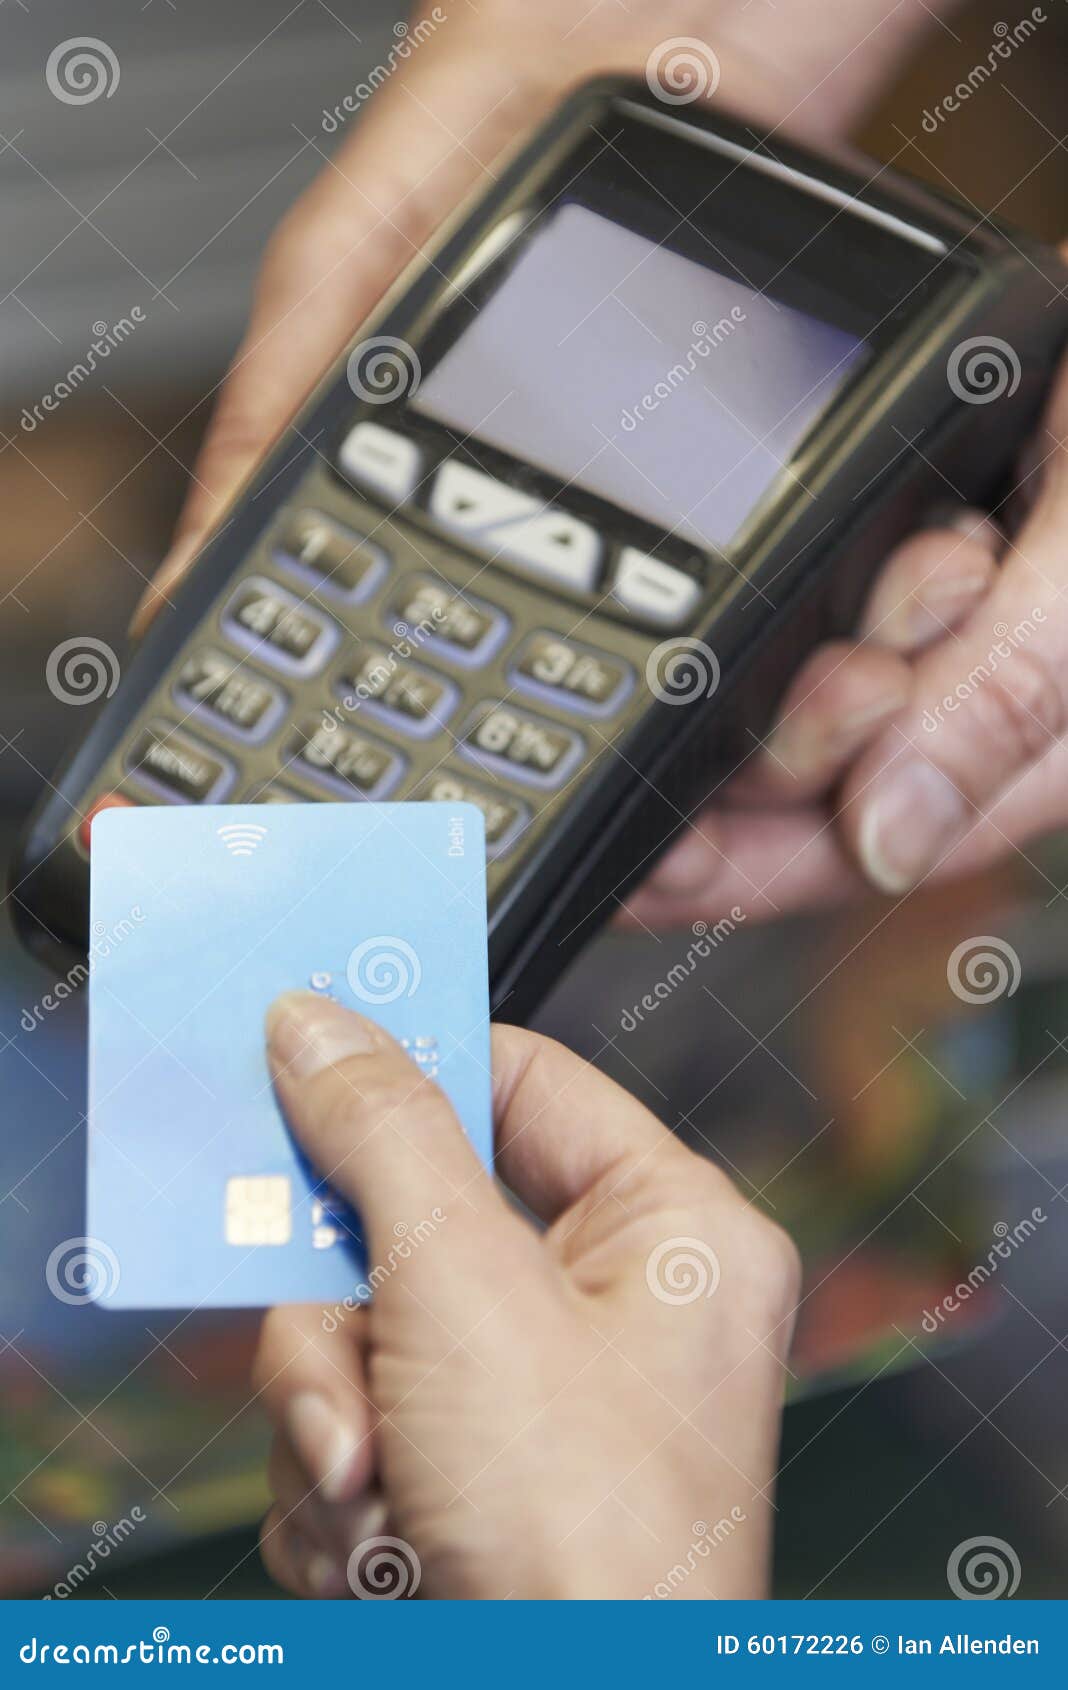 customer making purchase using contactless payment